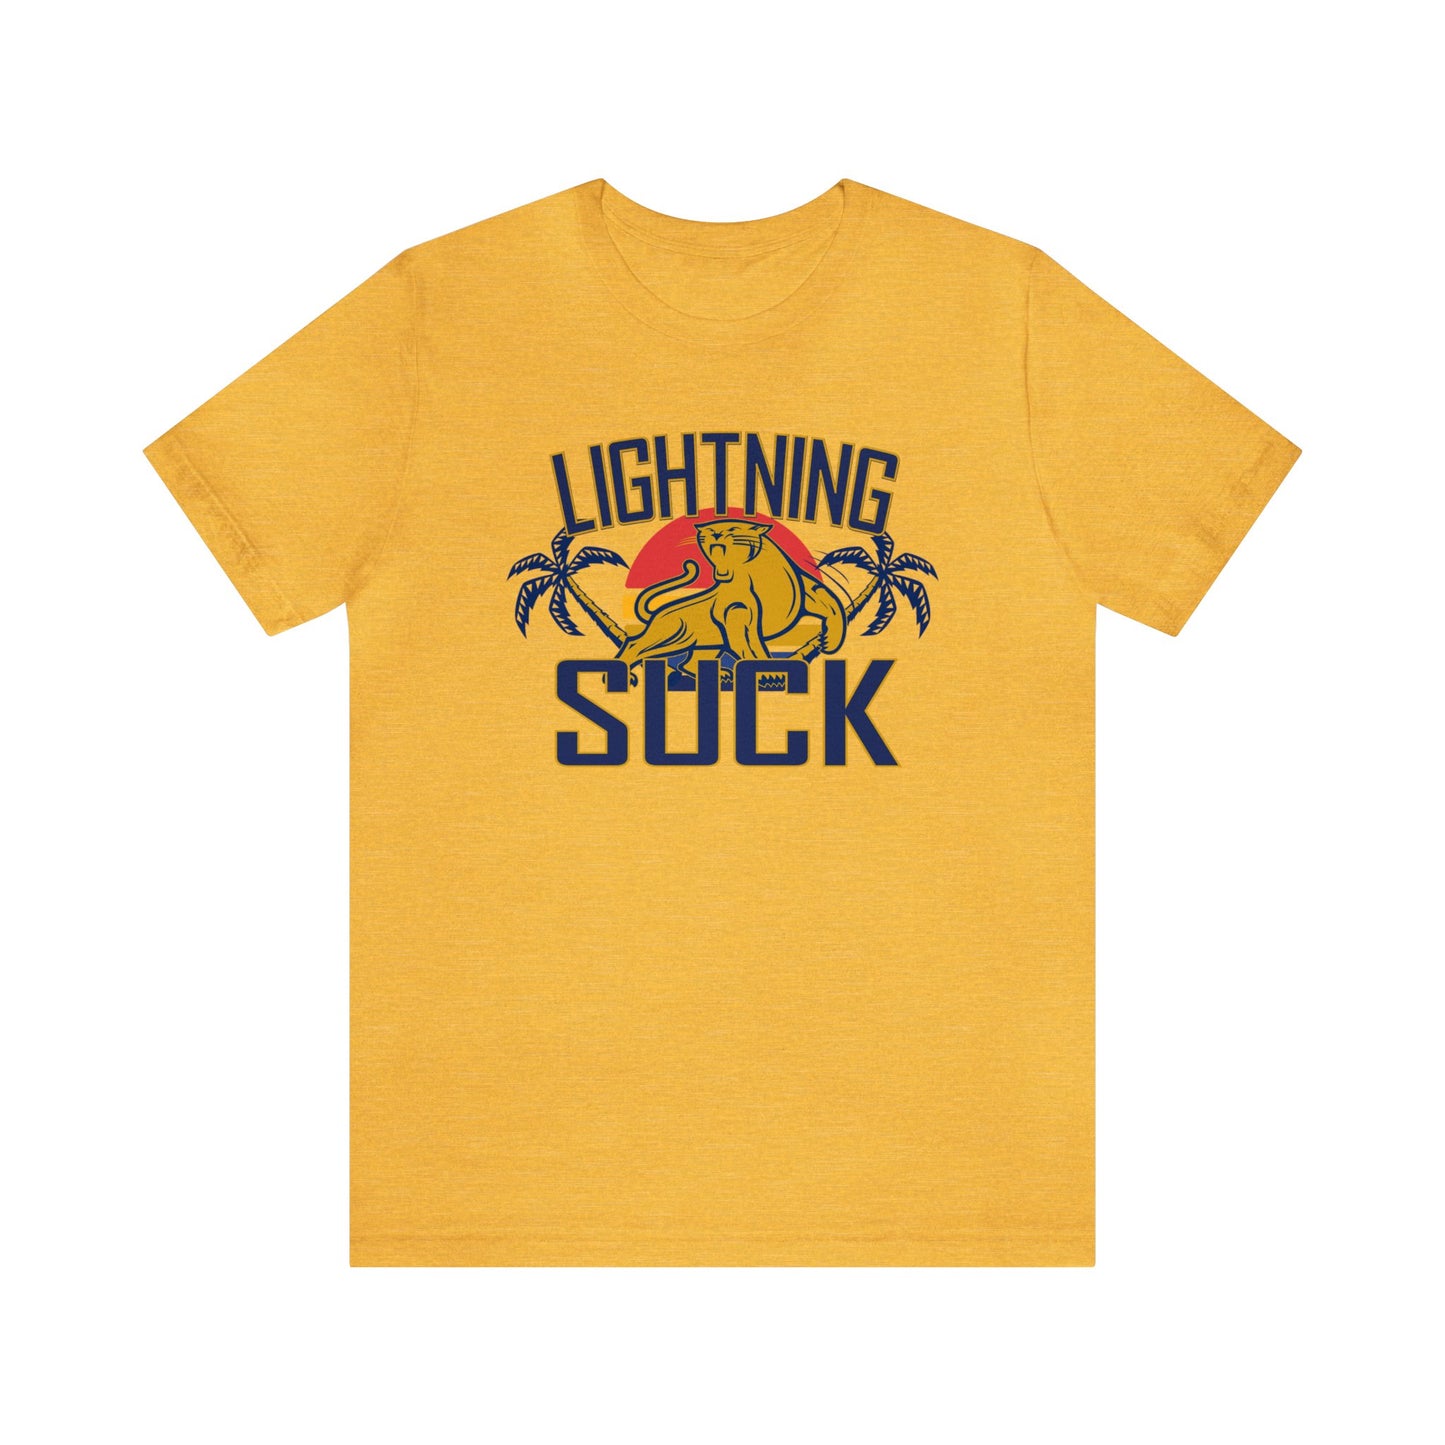 That Electricity Team Sucks (for Florida fans) - Unisex Jersey Short Sleeve Tee